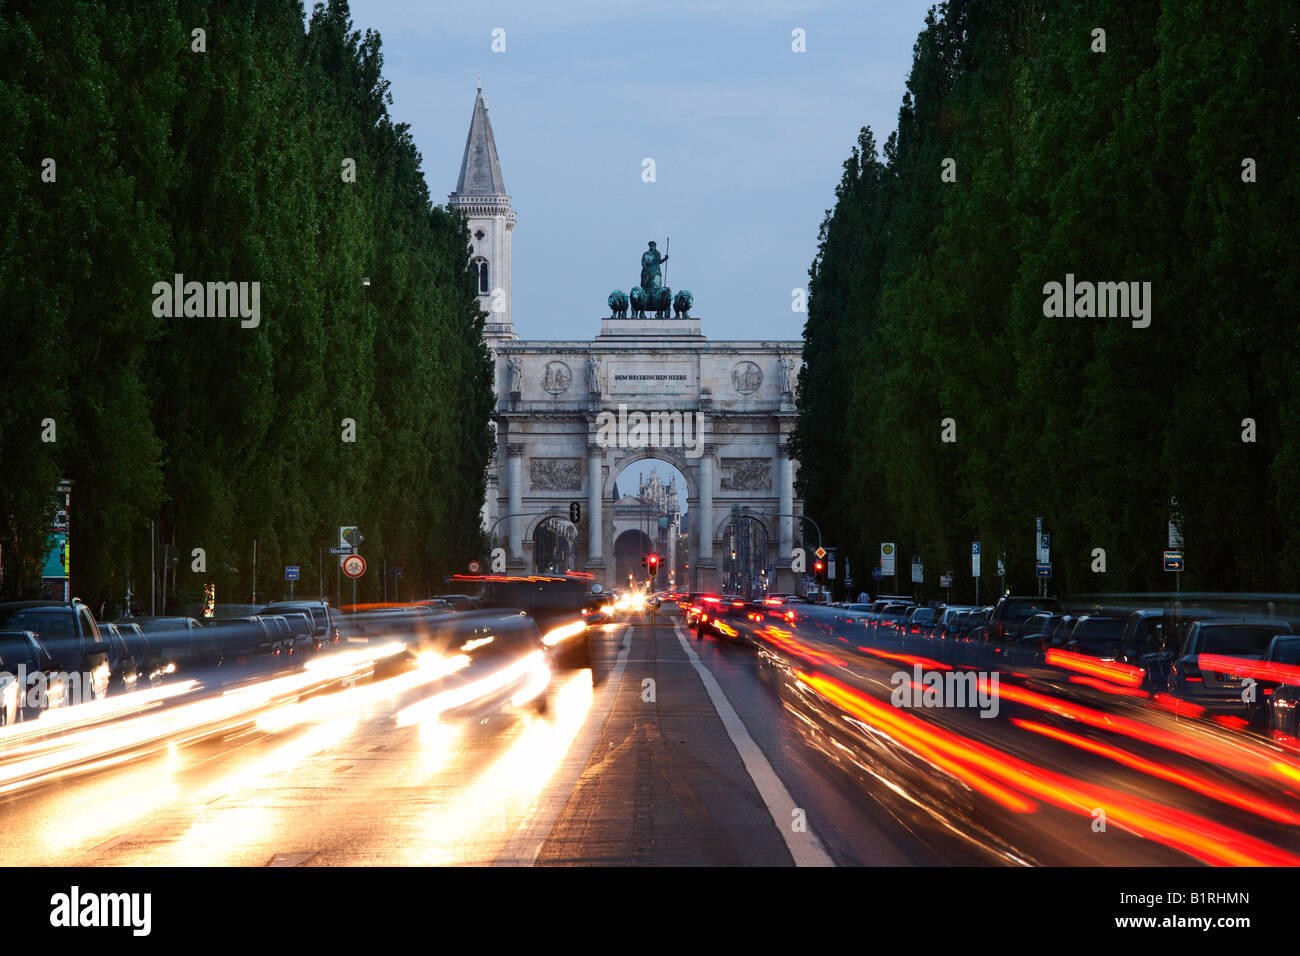 Siegestor, Victory Gate, with light trails from traffic in Leopoldstrasse Street, Munich, Upper Bavaria, Germany, Europe Stock Photo